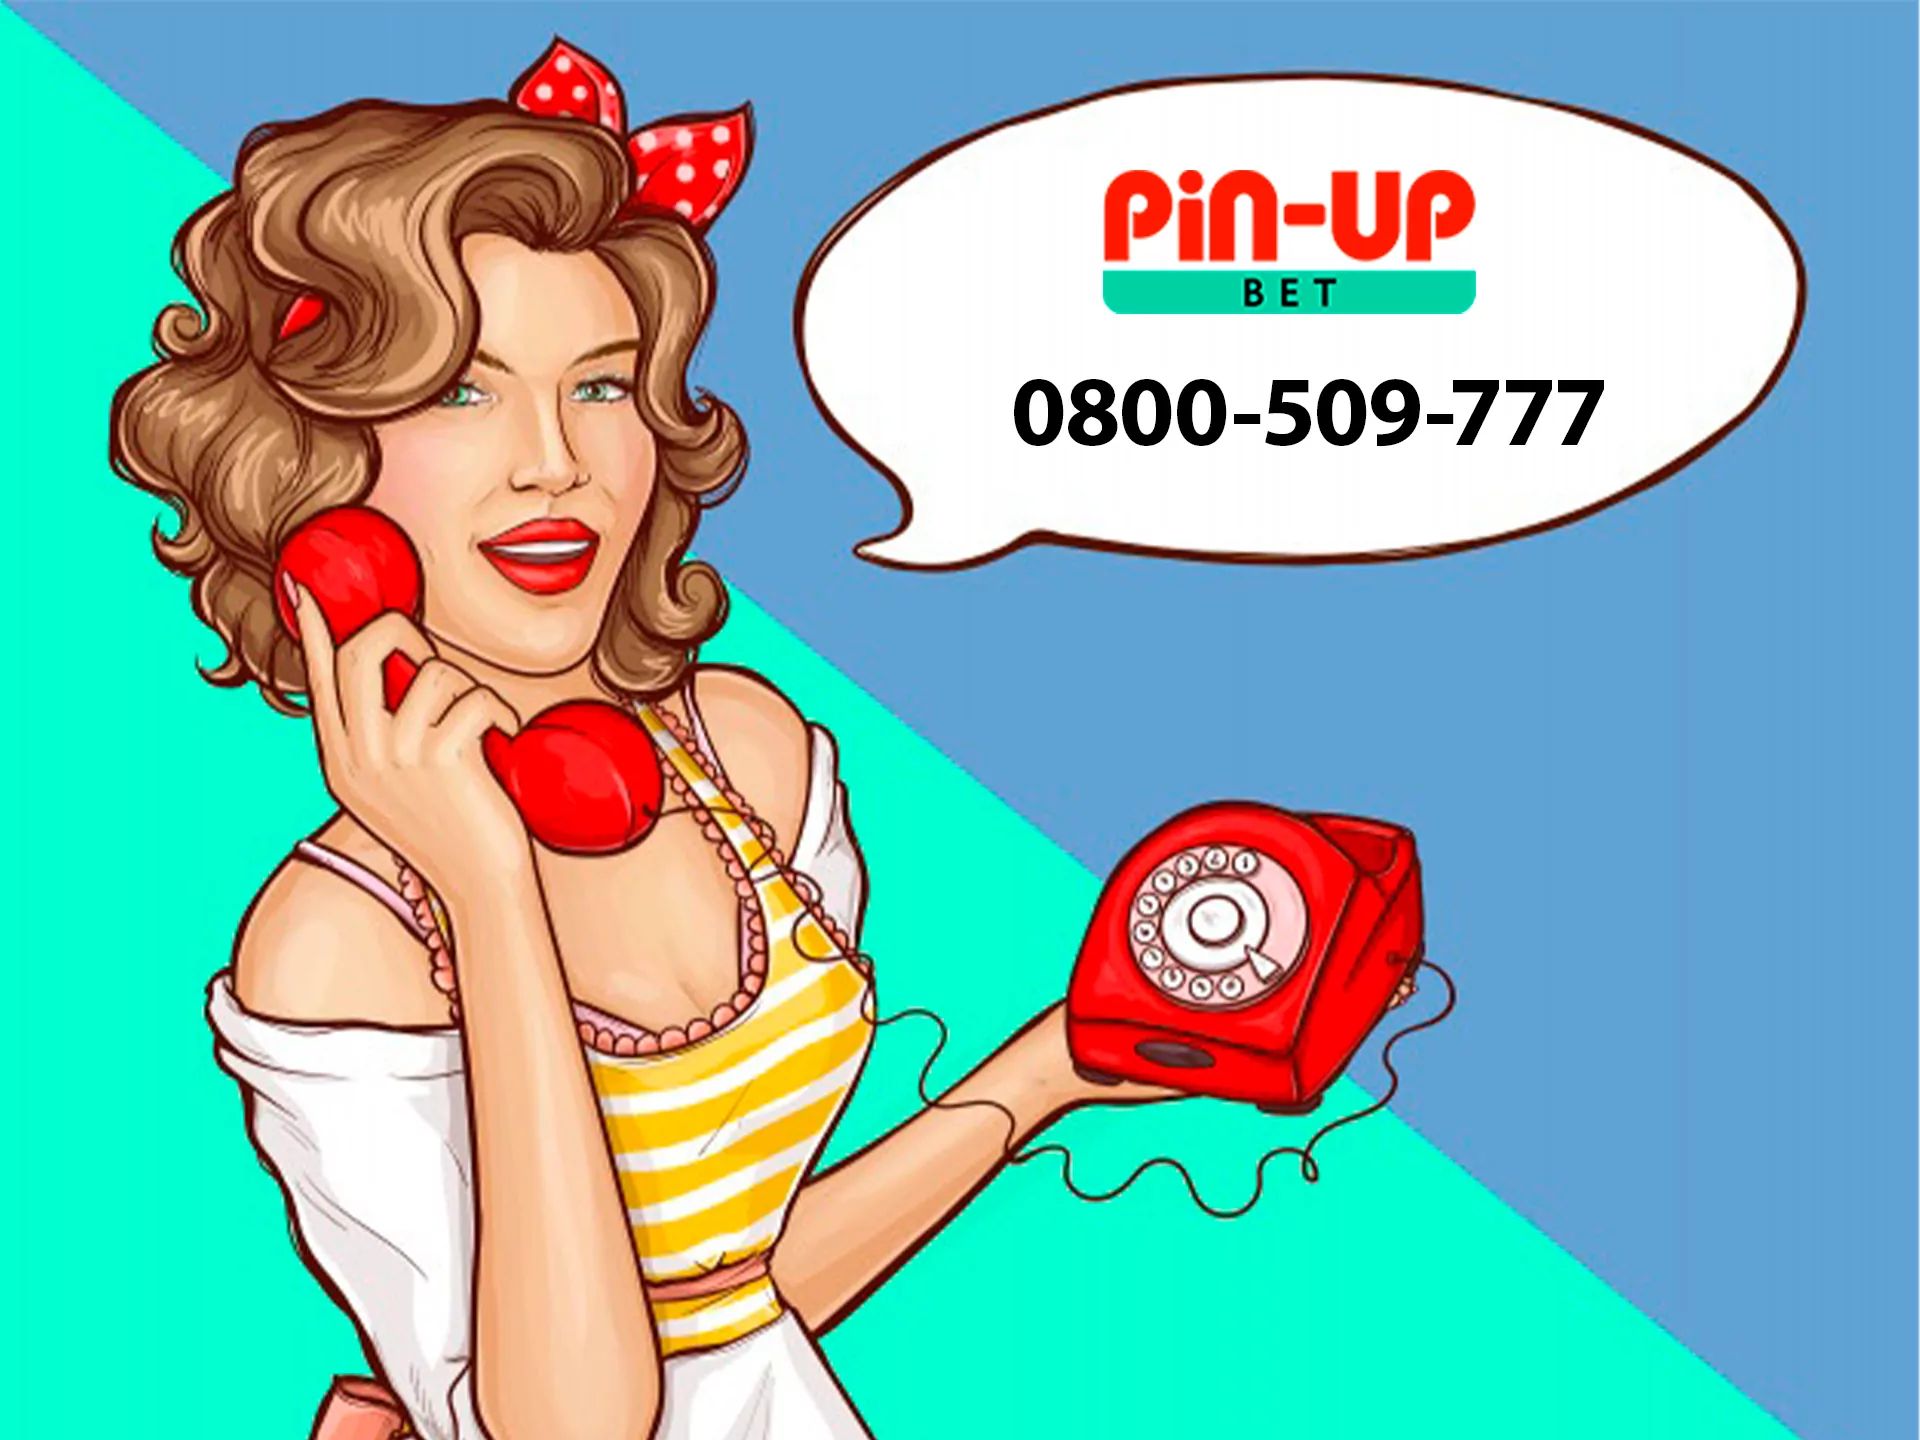 You can also call the Pin Up team if you have urgent questions.